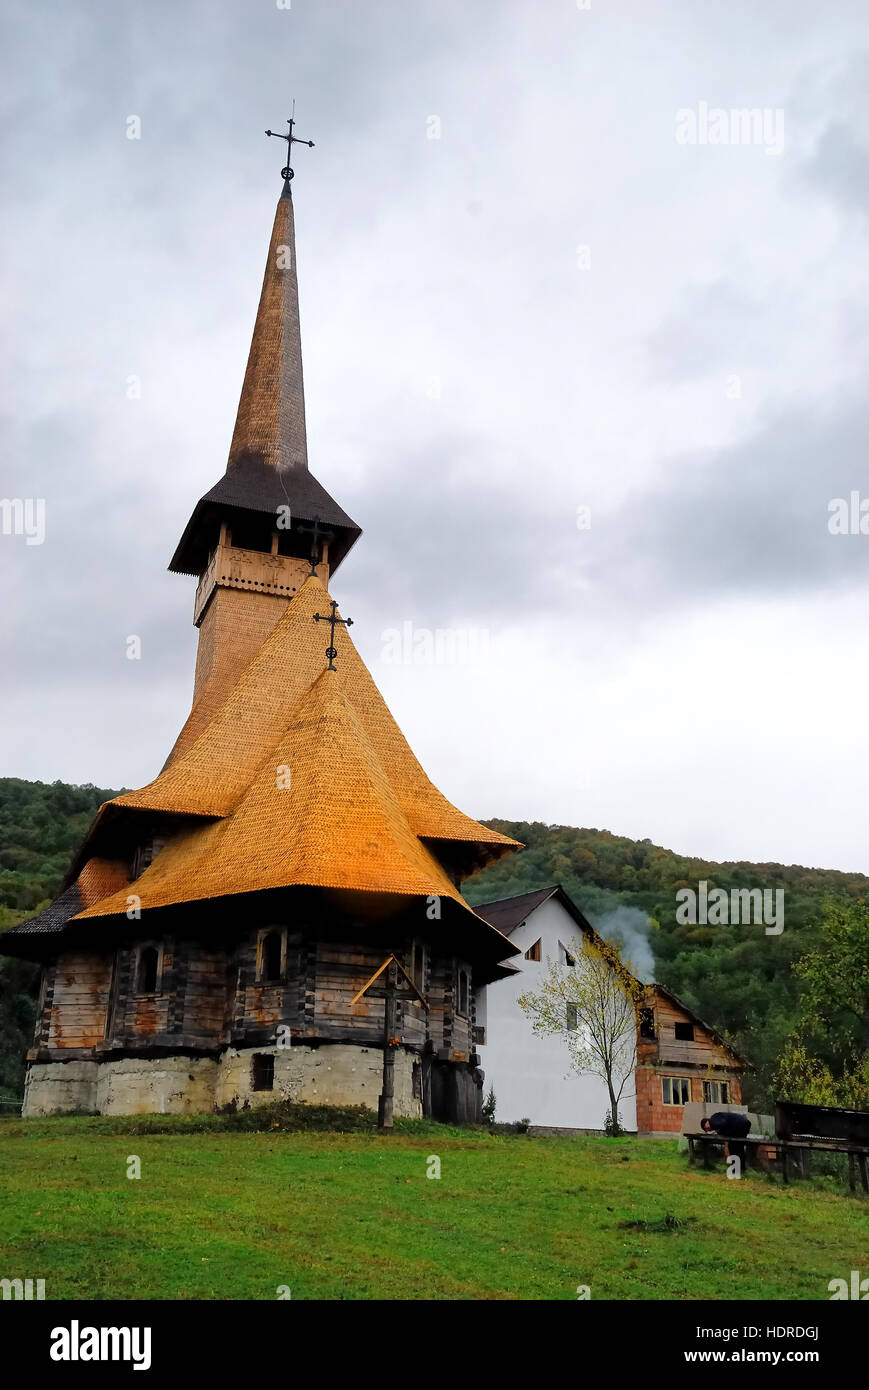 Maramures, an isolated Carpathian region of Romania. Wooden church of St Parascheva. She is a highly venerated Orthodox saint. Stock Photo